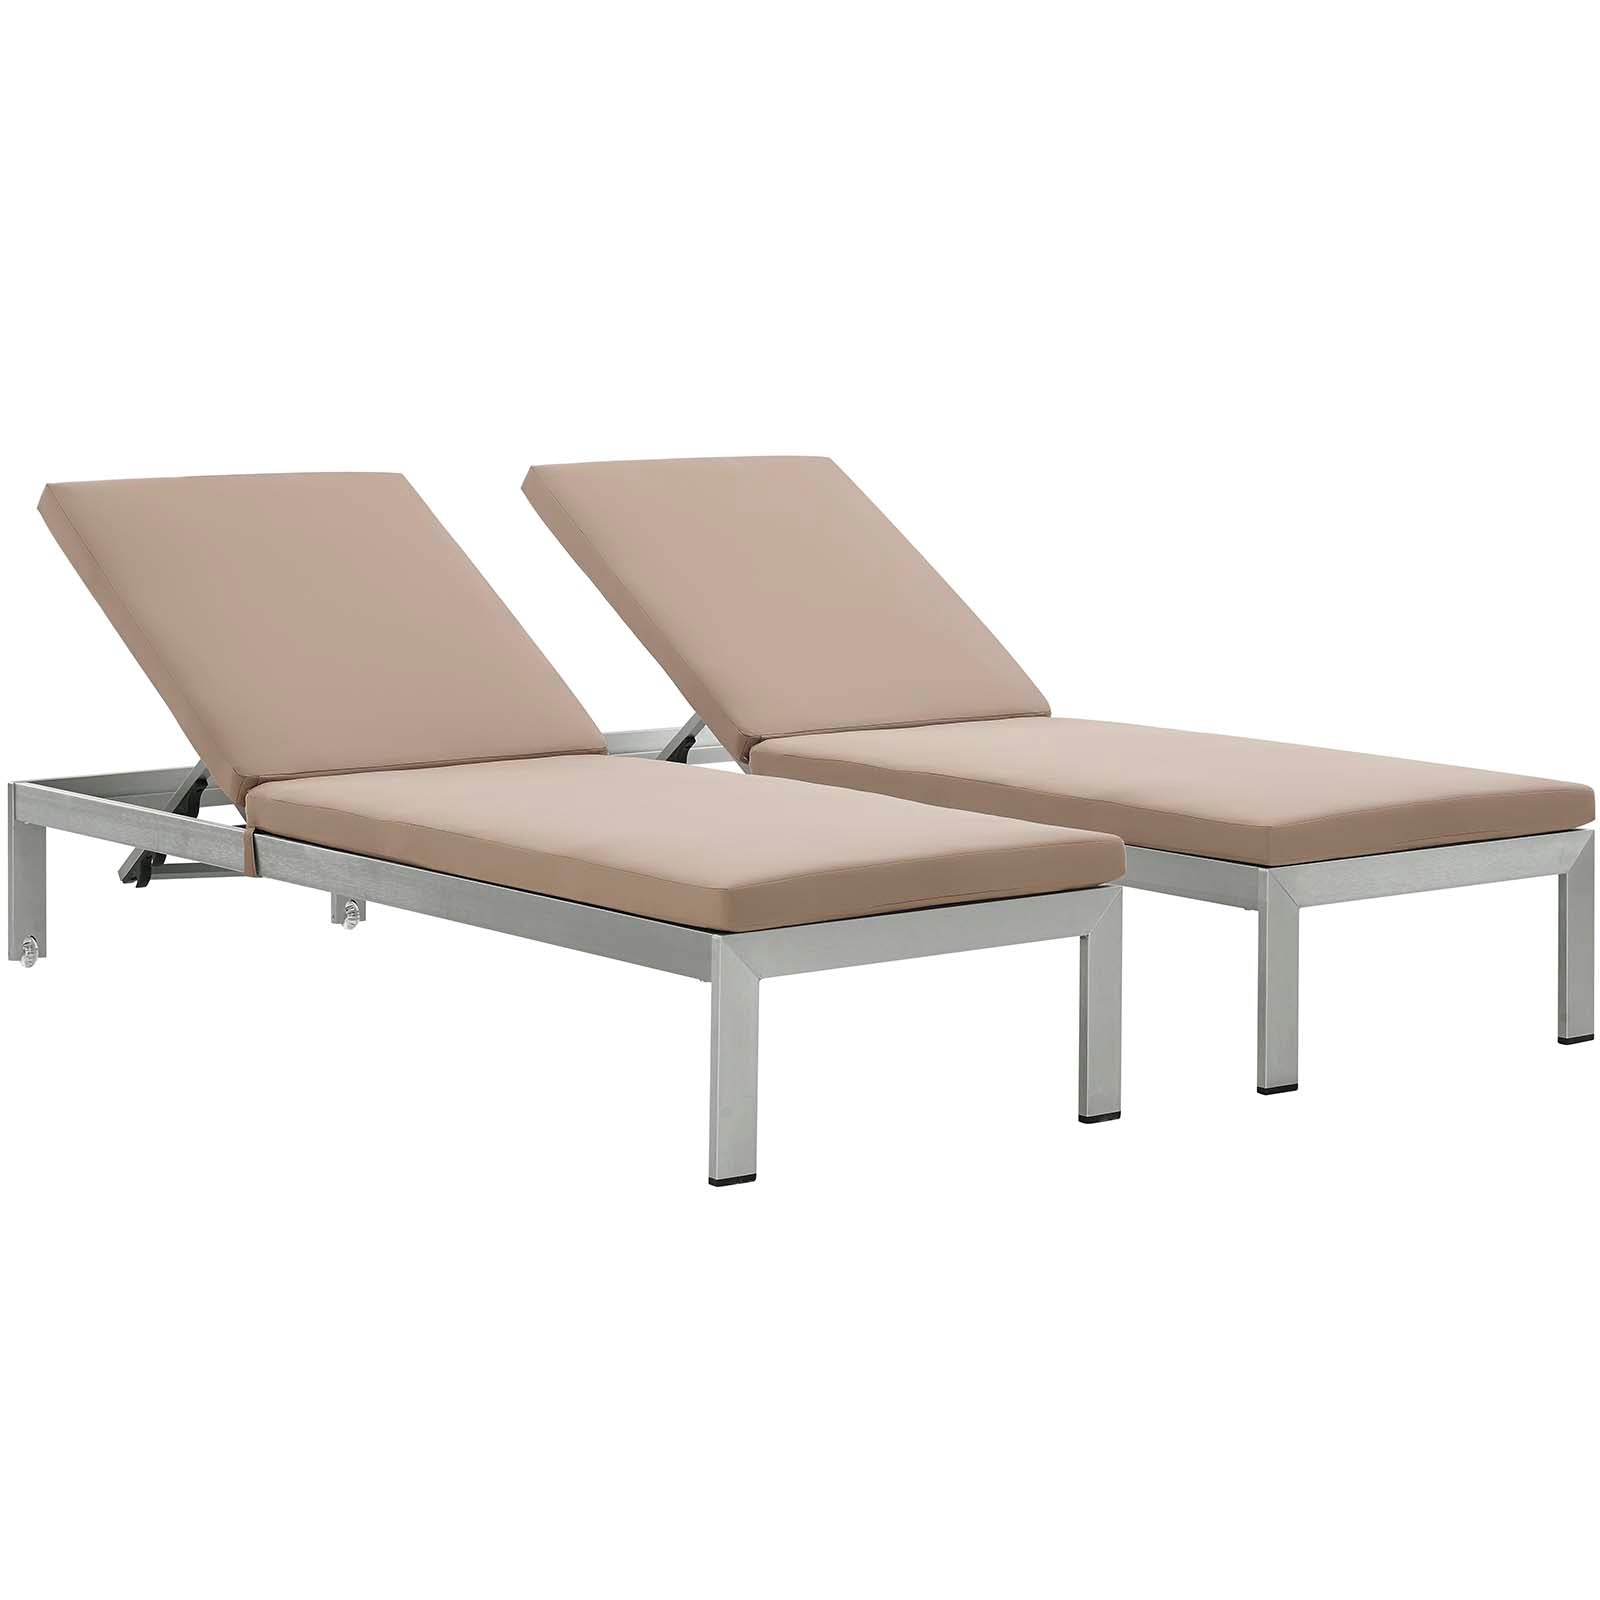 Modway Outdoor Loungers - Shore Chaise with Cushions Outdoor Patio Aluminum Silver Mocha (Set of 2)